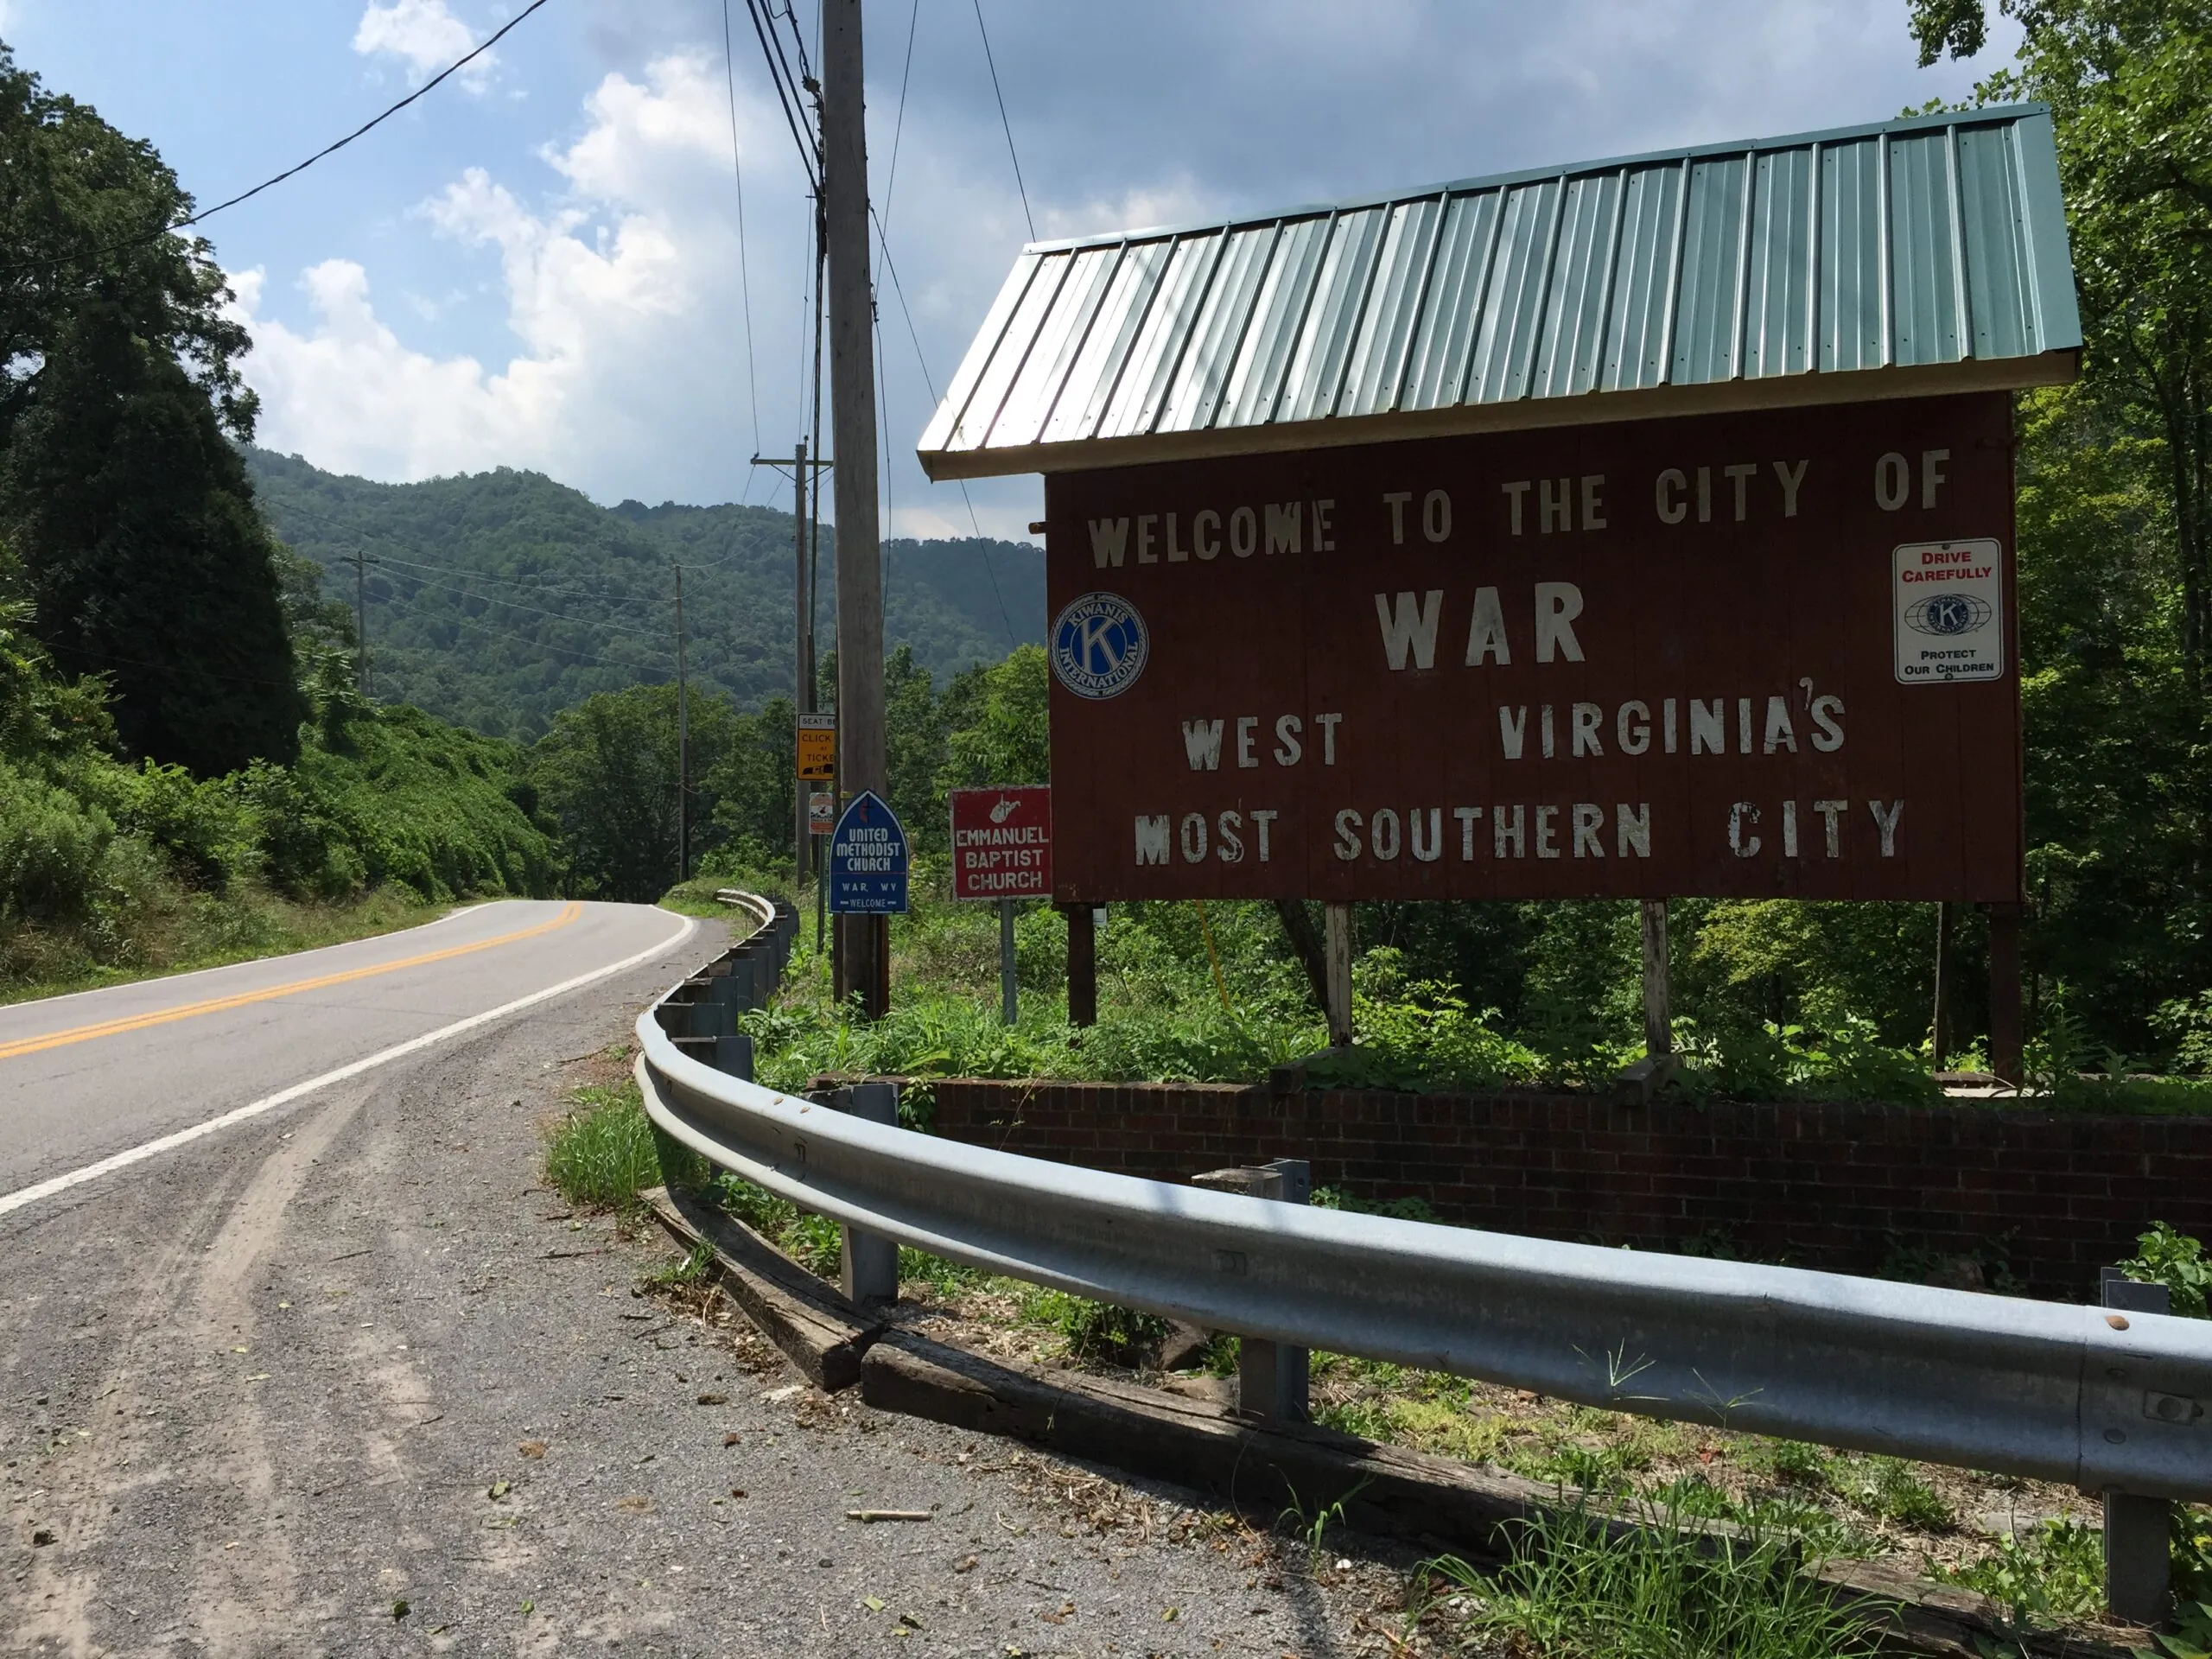 The town of War, located in McDowell County, West Virginia, has been repeatedly ranked as the poorest town in the state